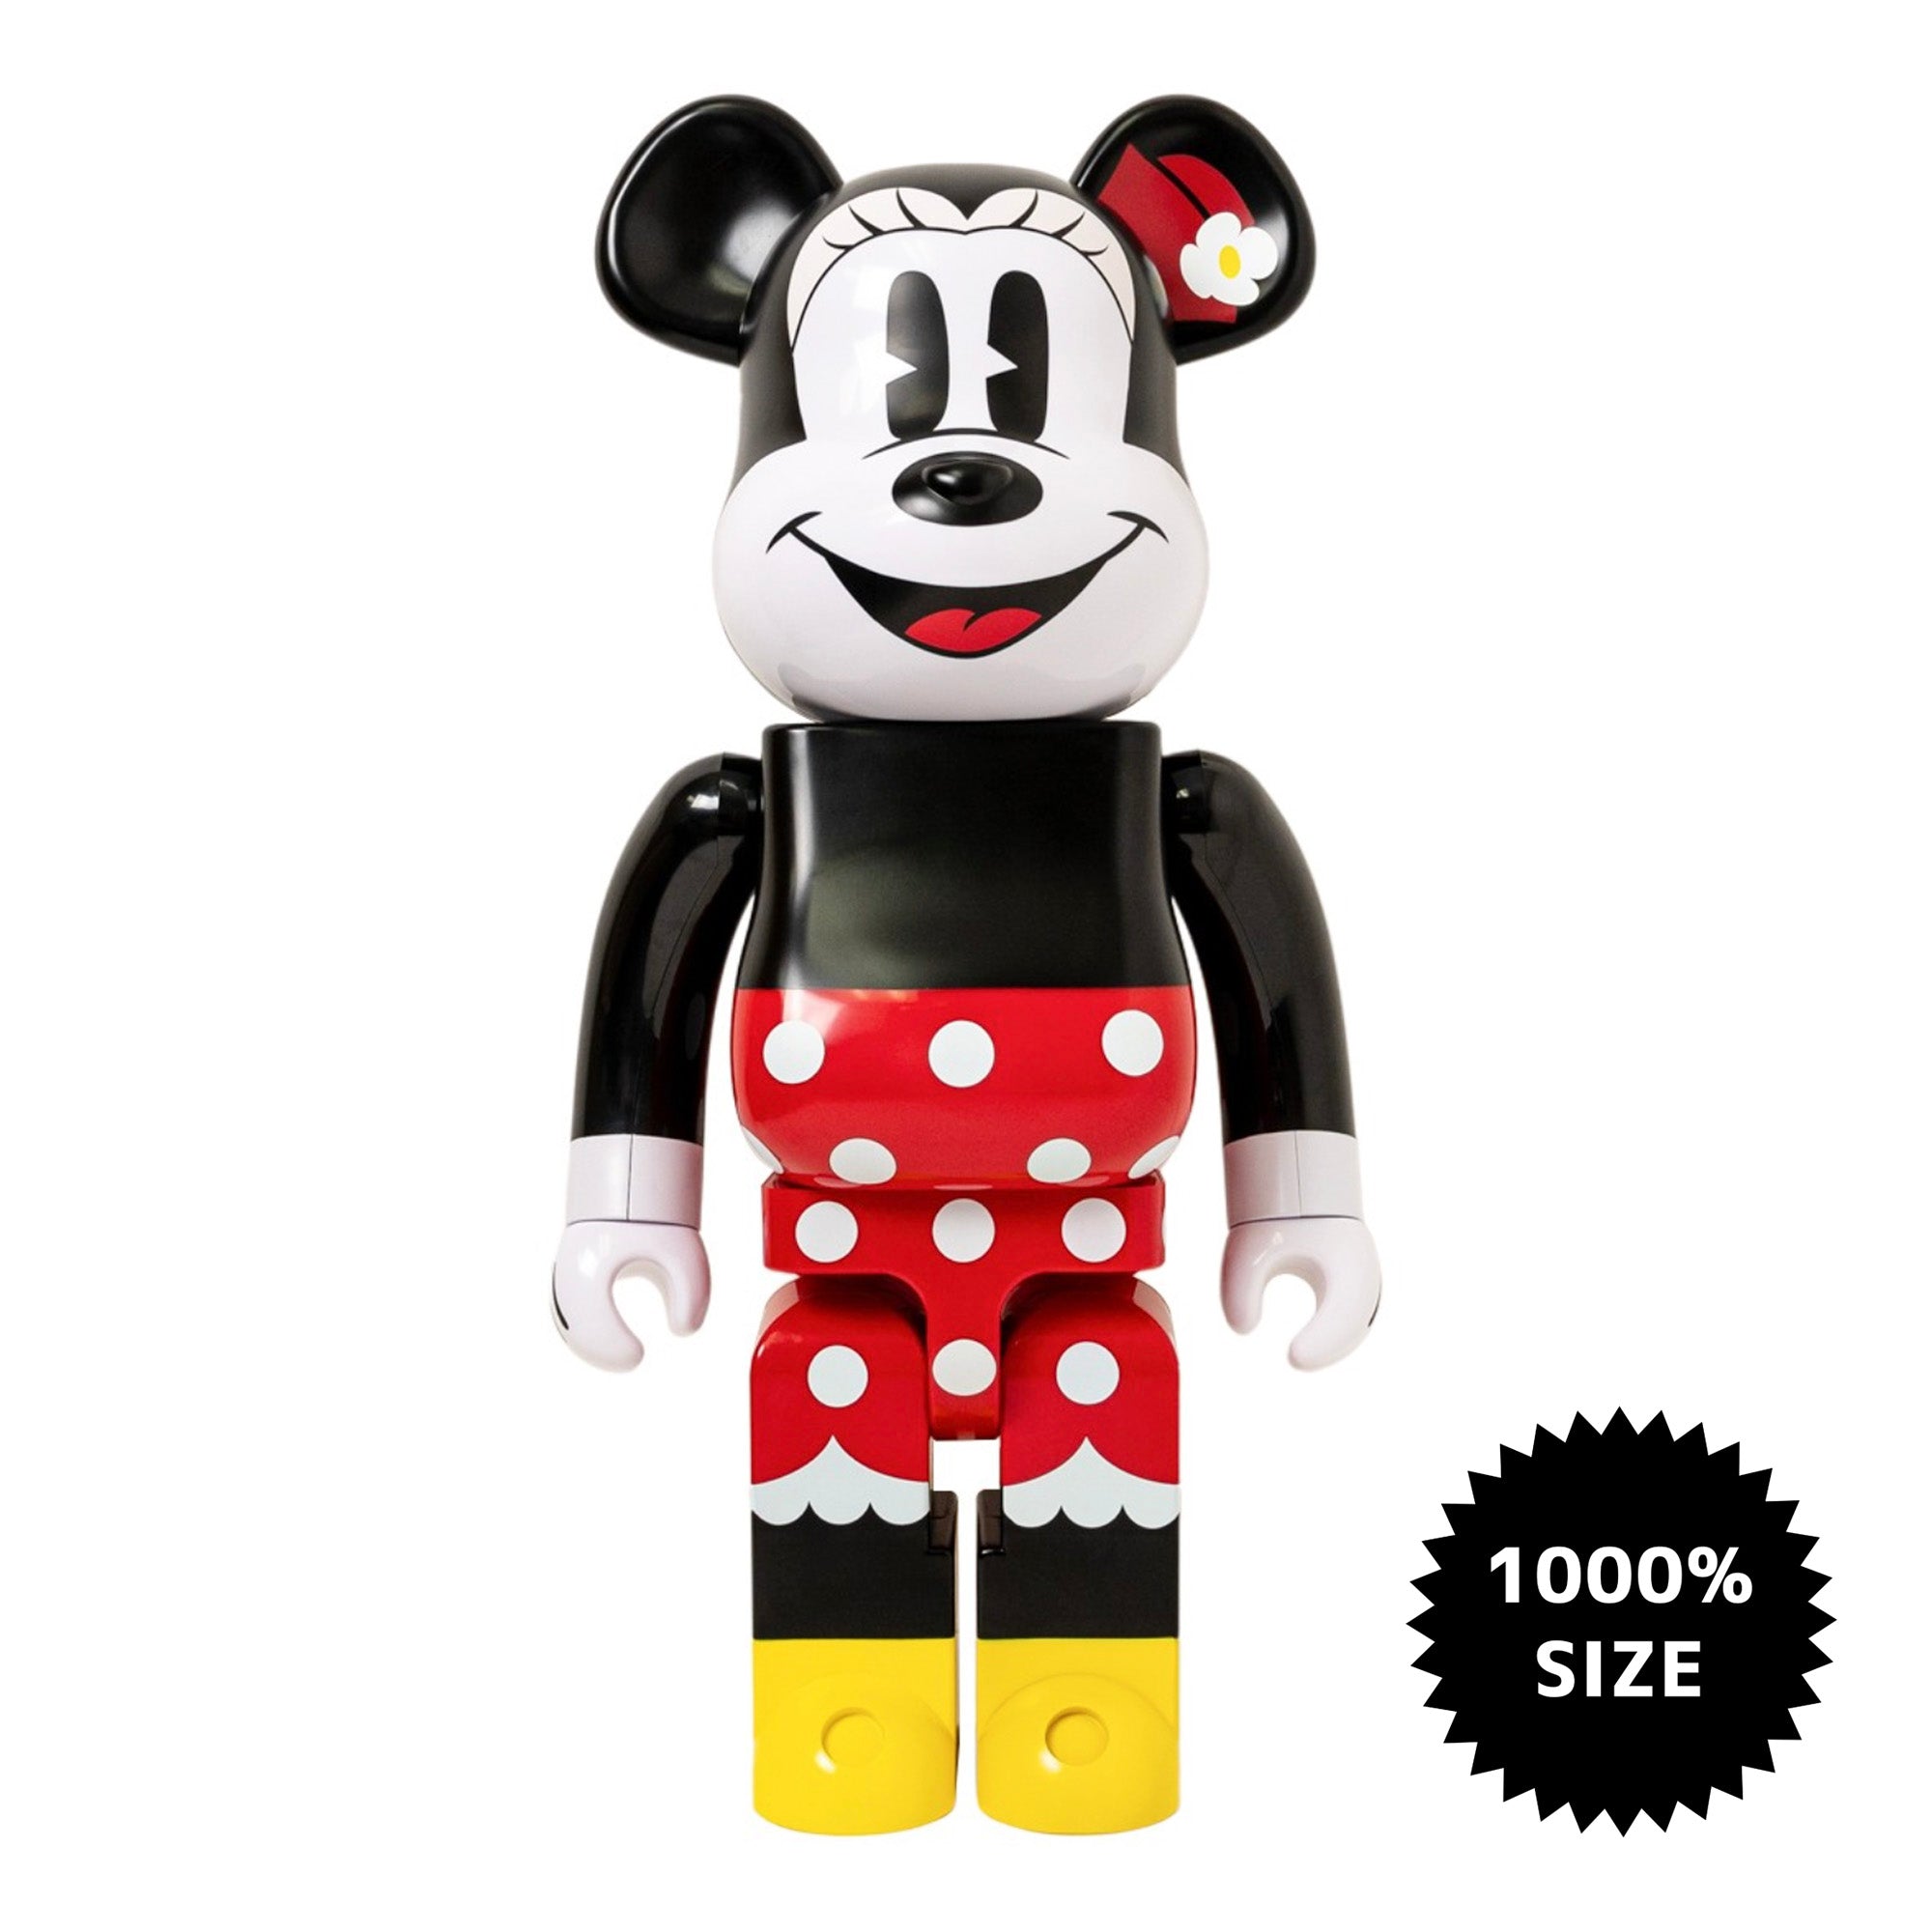 BE@RBRICK MINNIE MOUSE 1000％エンタメ/ホビー